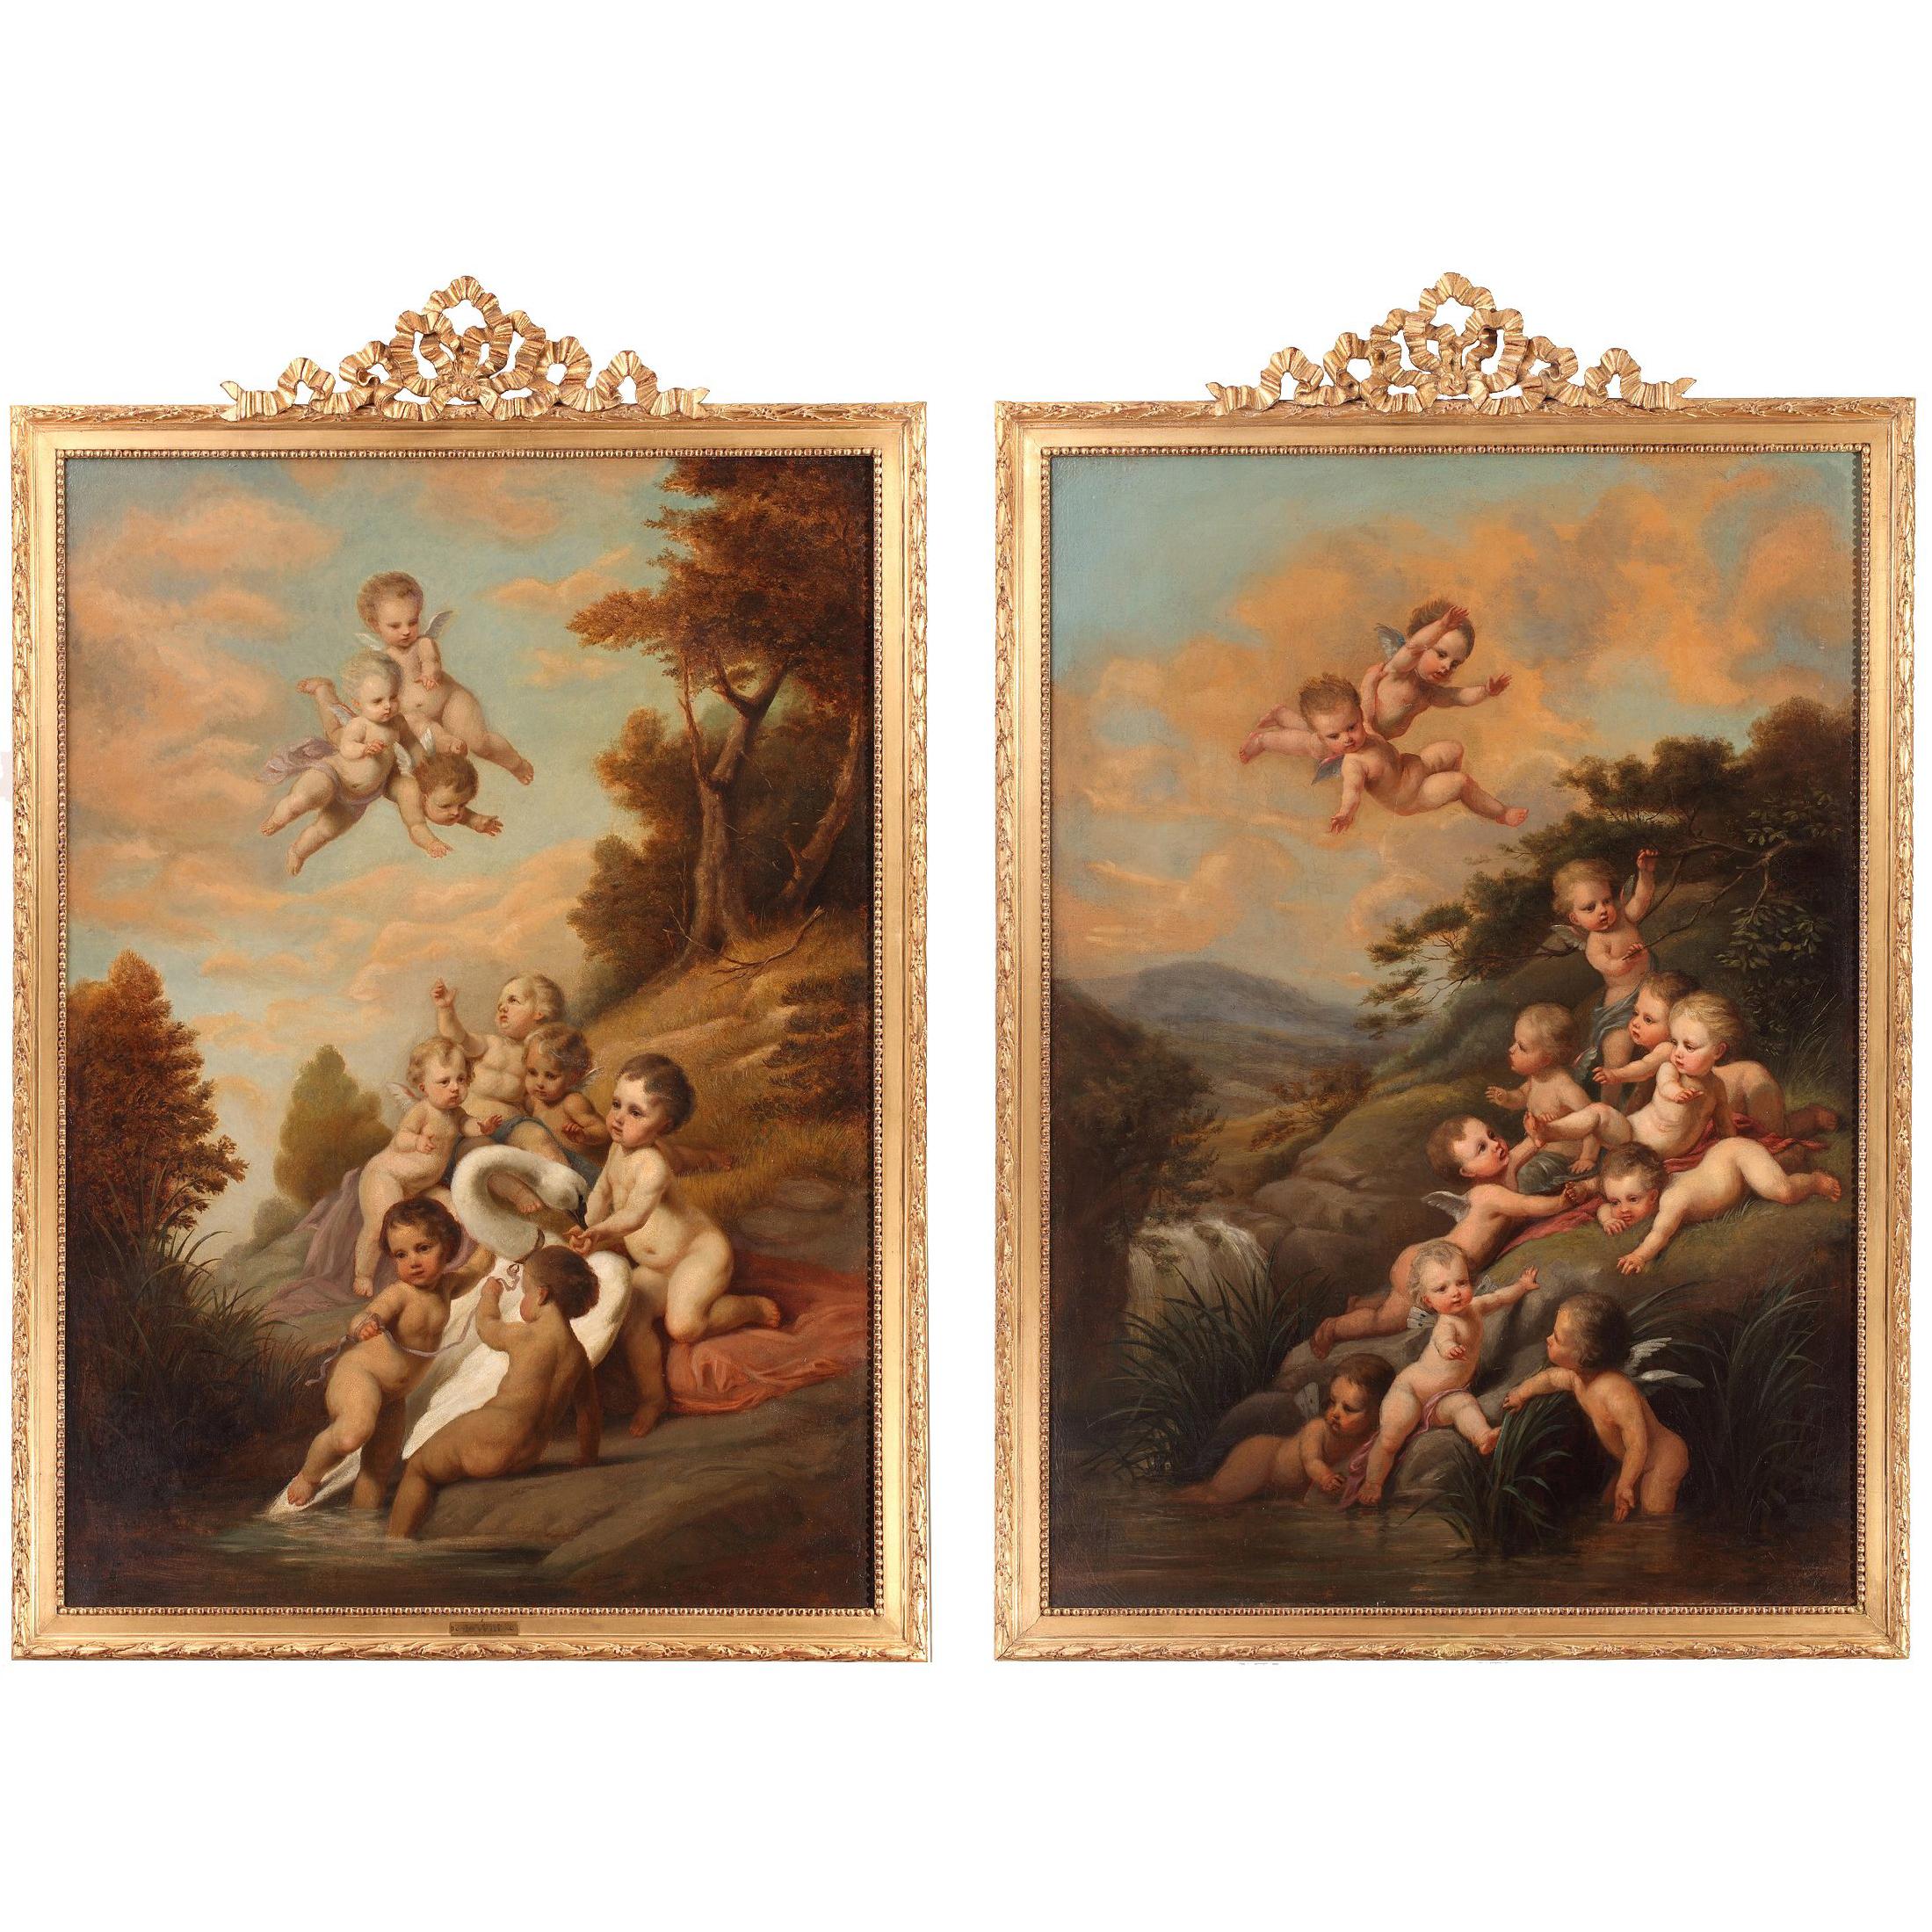 Charming Pair of Paintings "Putti Playing in a River" after Jacob de Wit